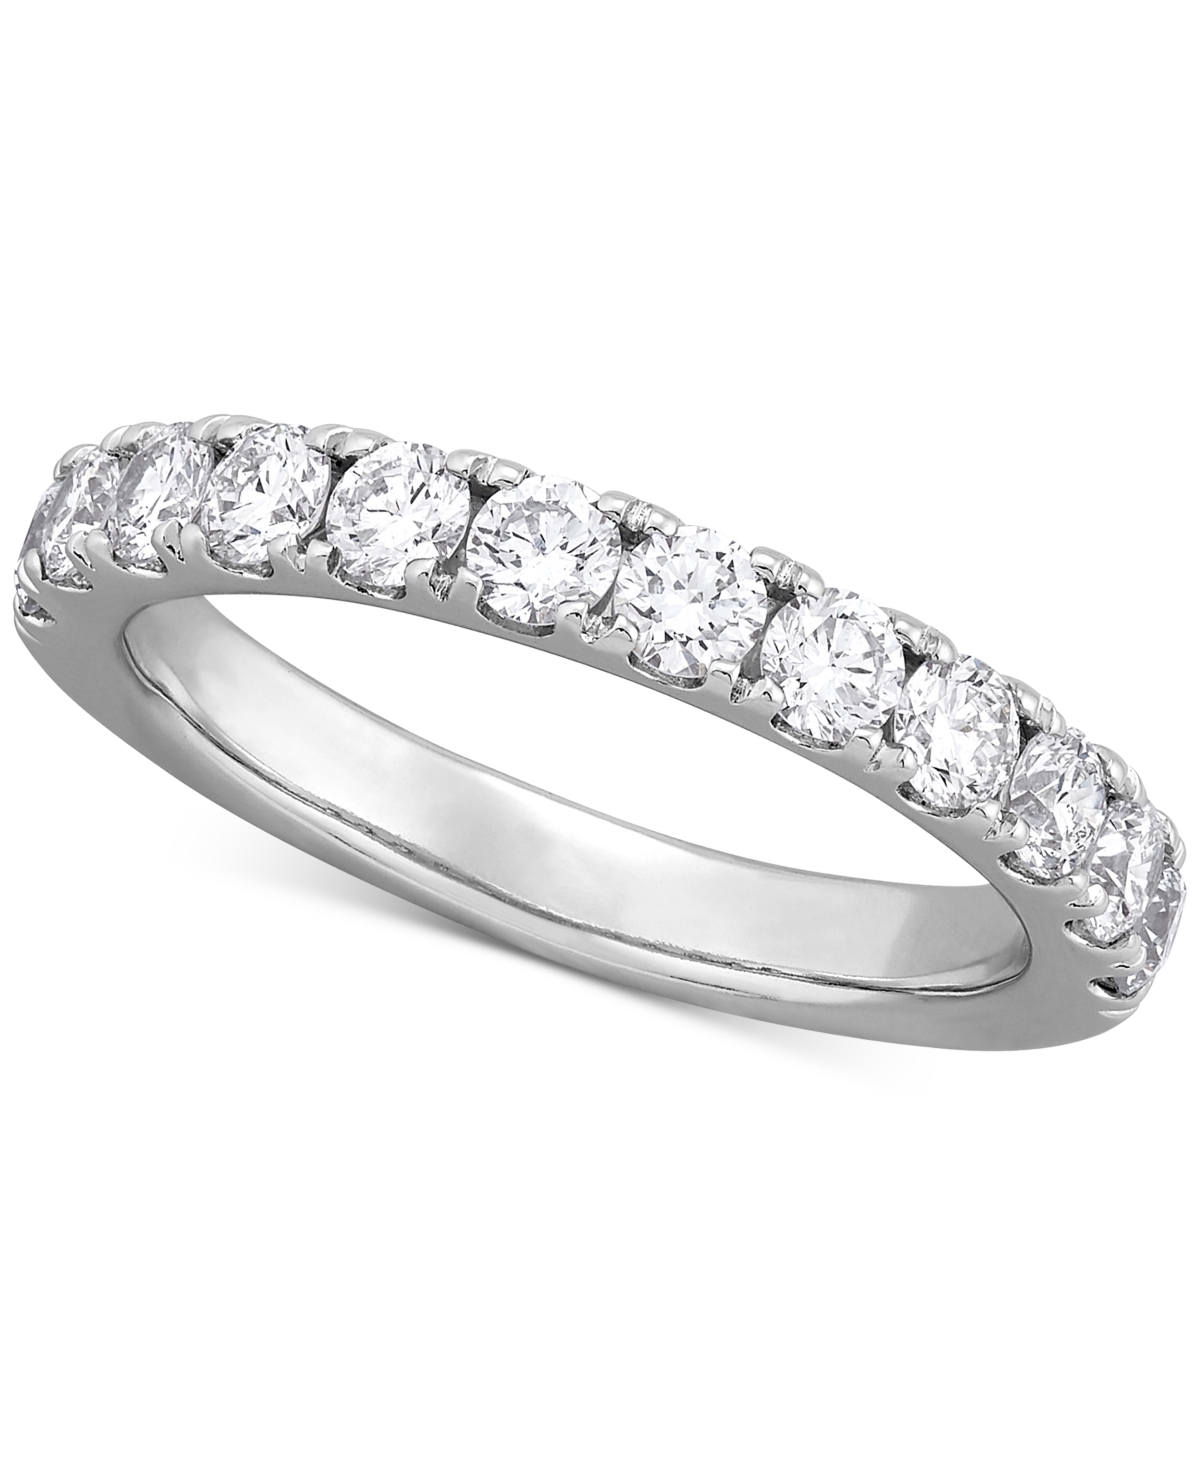 Grown With Love Igi Certified Lab Grown Diamond Band (1 ct. t.w.) in 14k White Gold